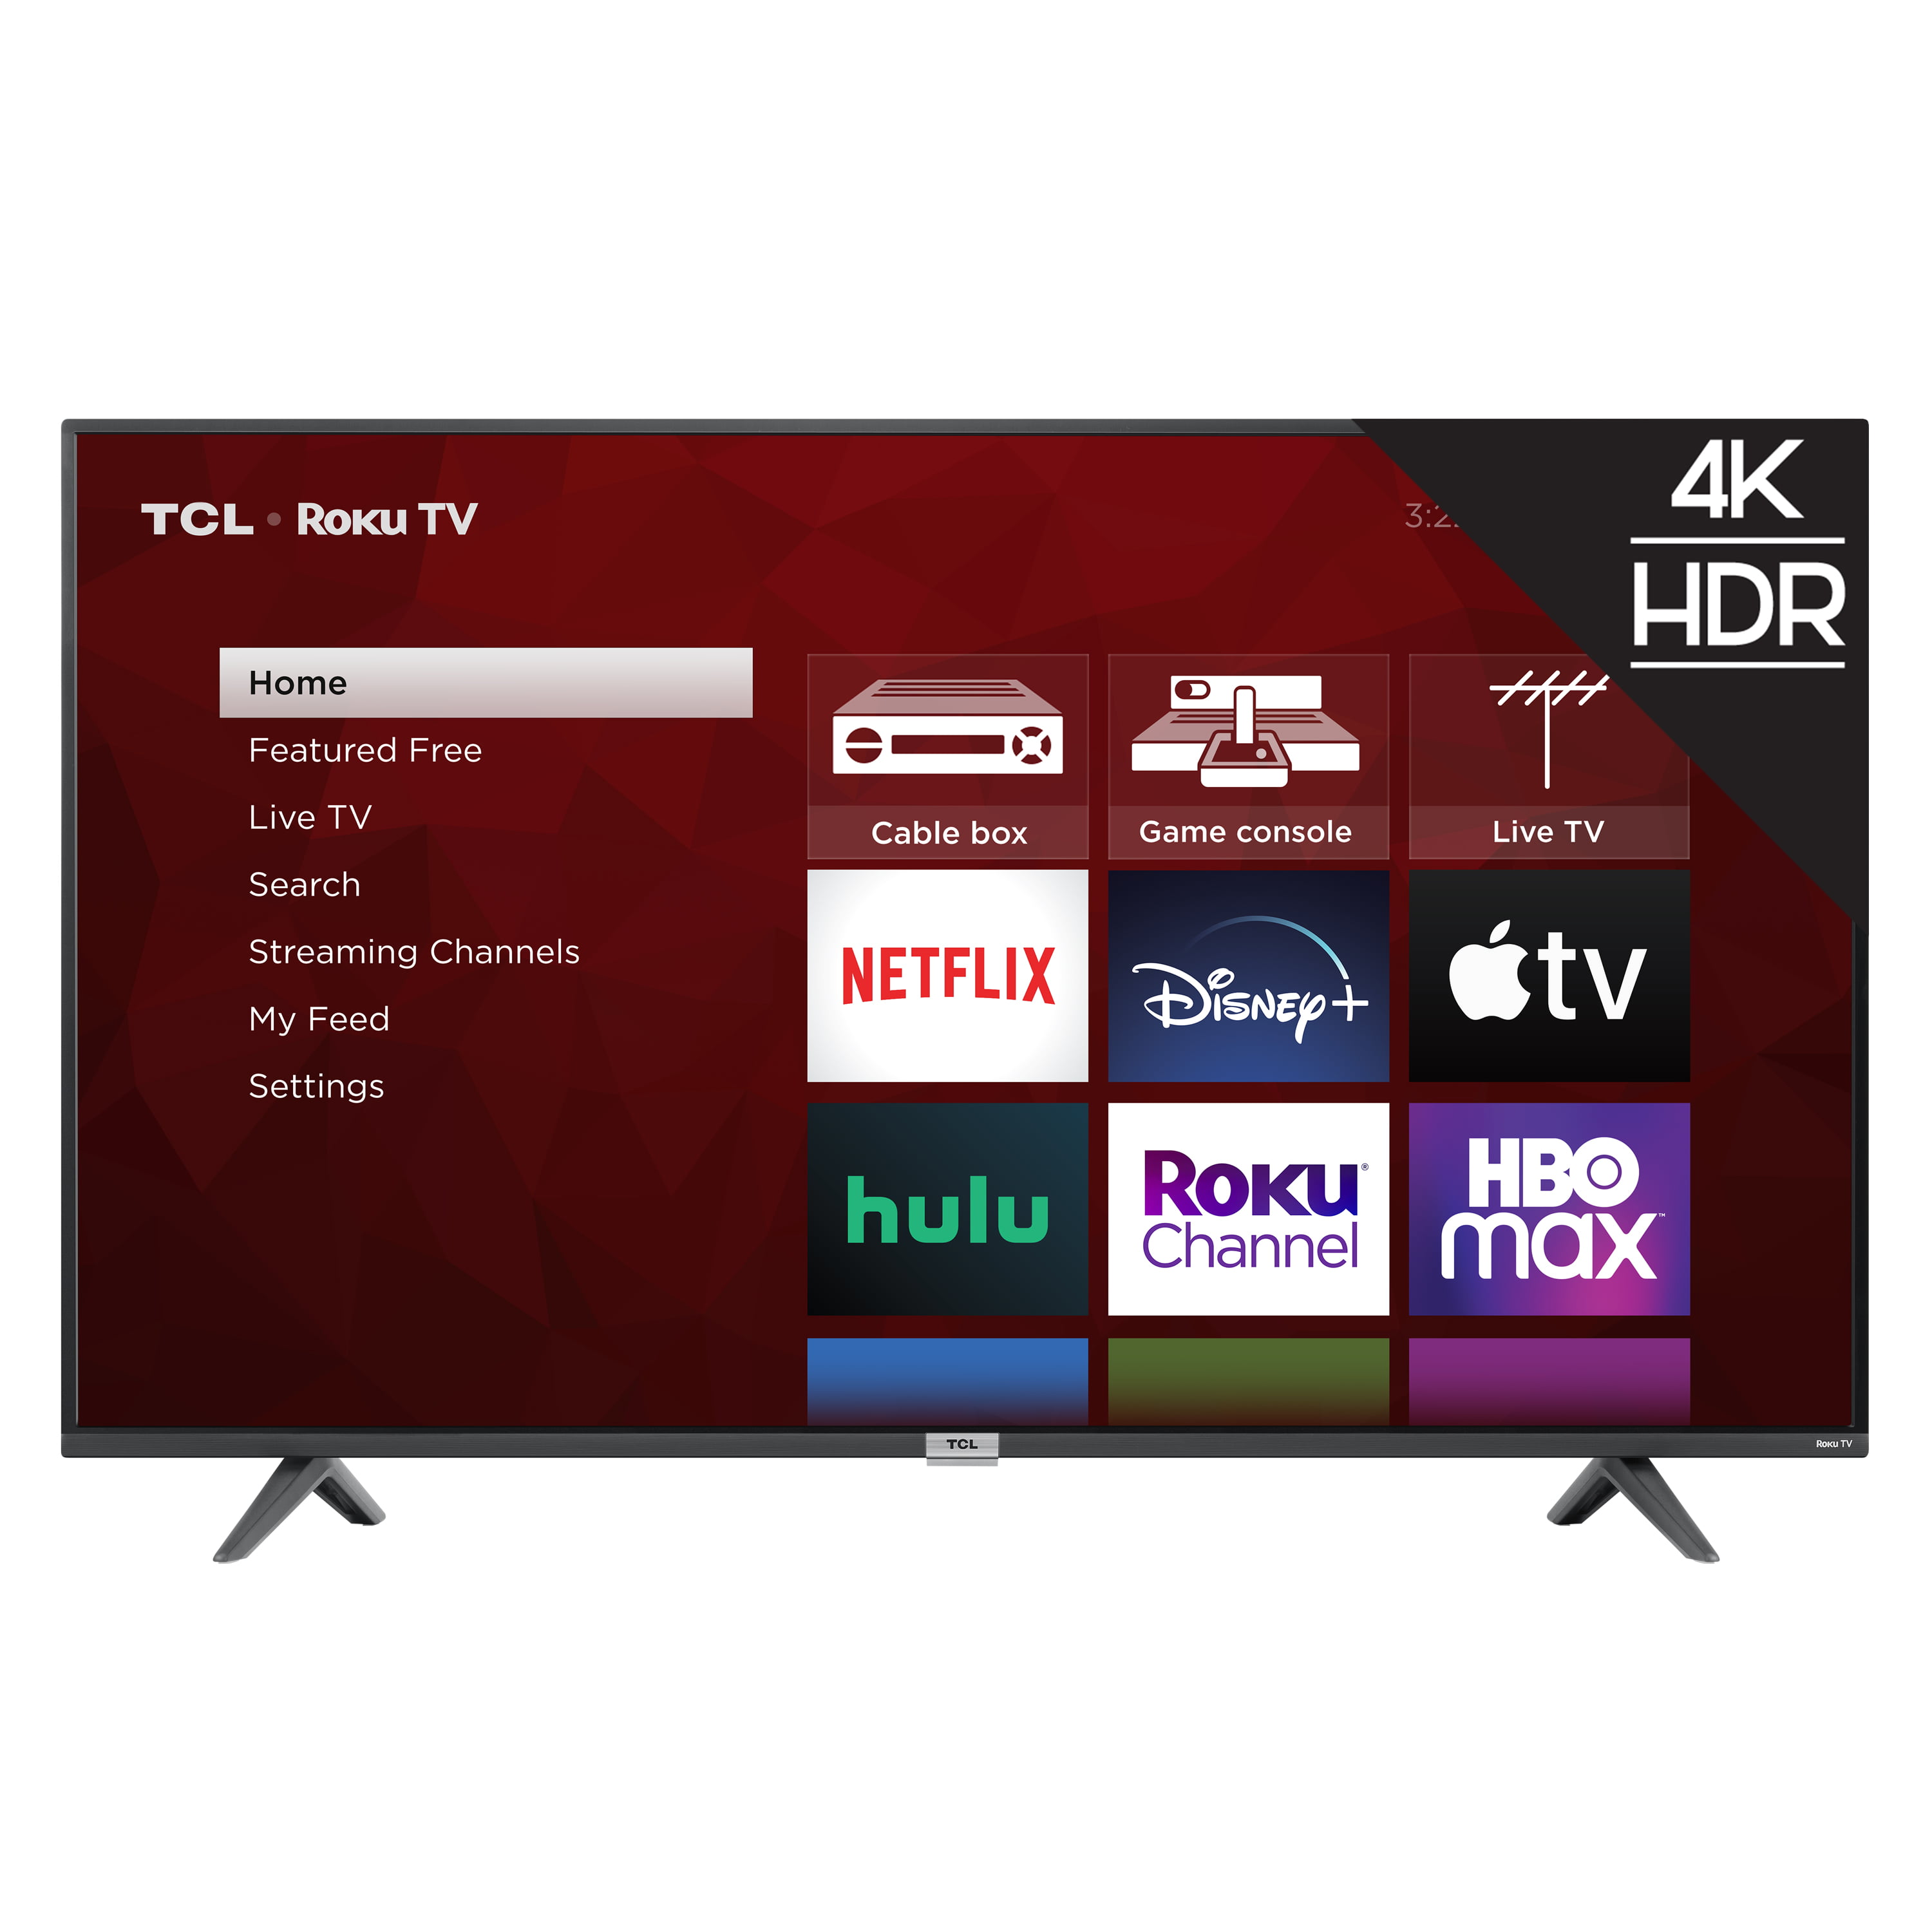 65" TCL 65S431 4-Series 4K UHD HDR Roku Smart LED HDTV $228 - Walmart In-Store Clearance YMMV